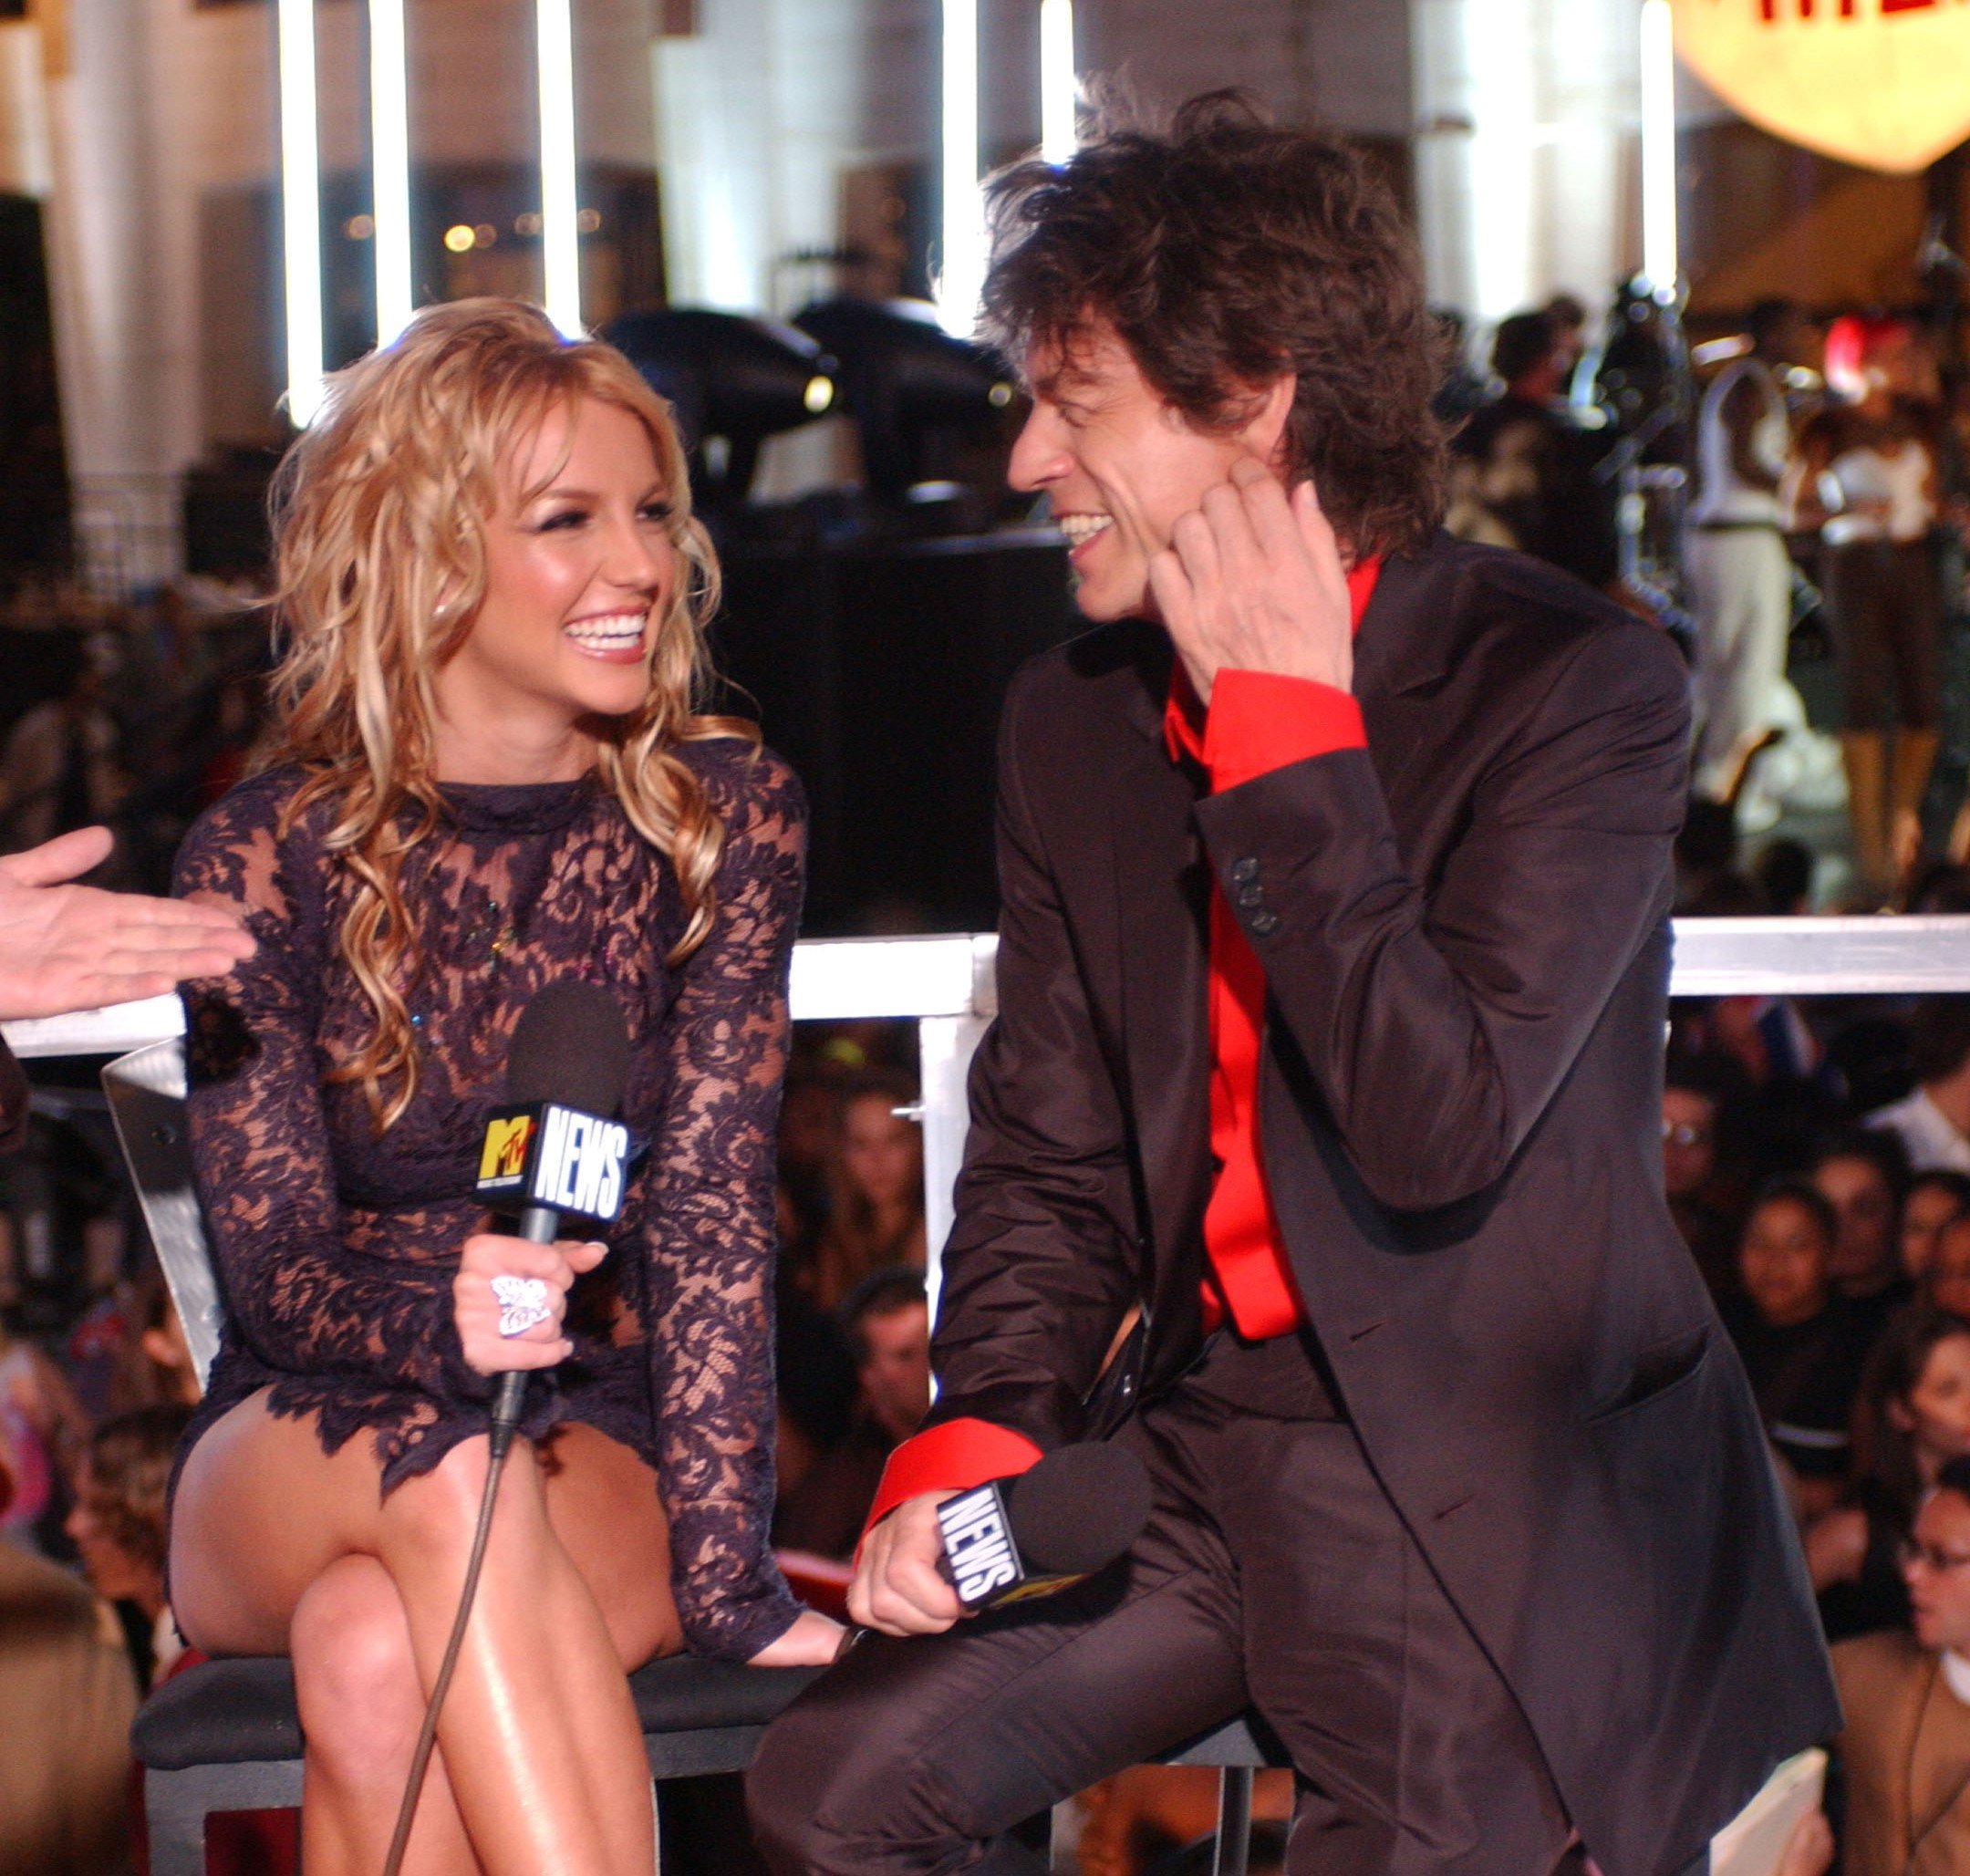 Britney Spears and The Rolling Stones' Mick Jagger sitting next to each other